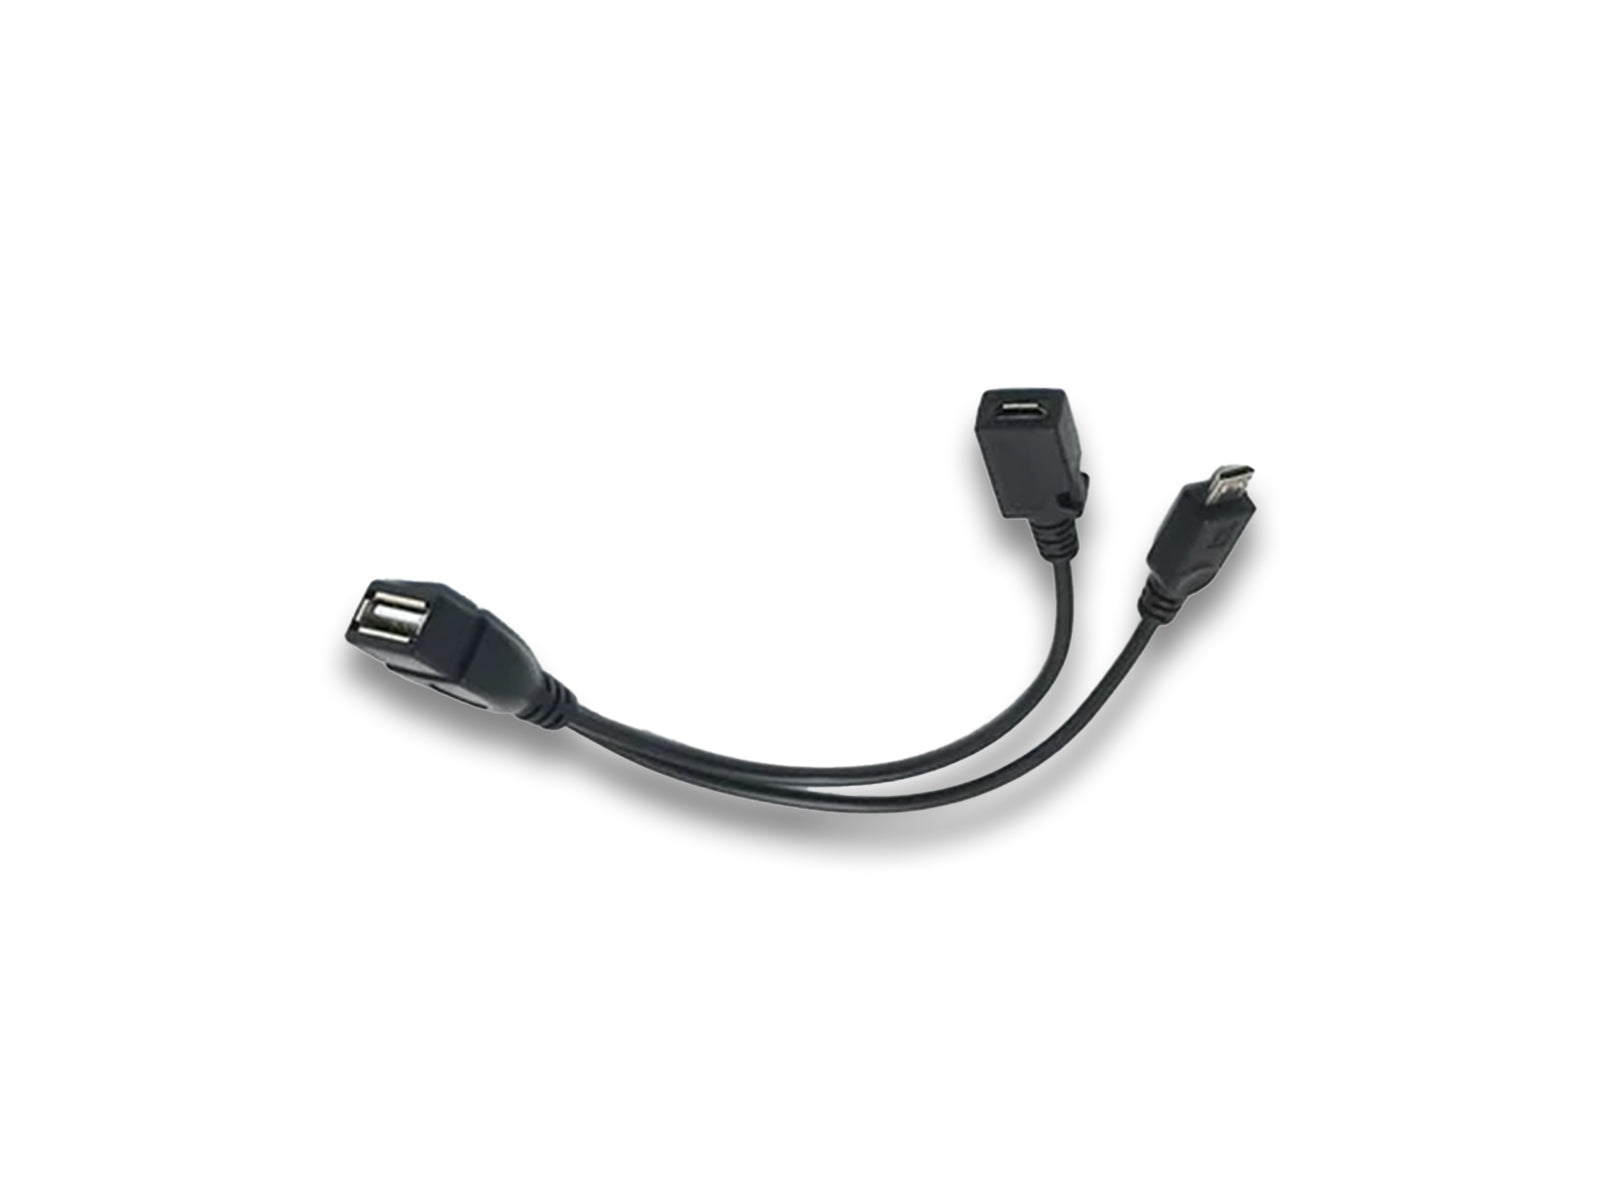 USB to Micro USB OTG Cable (Power & Data)  View